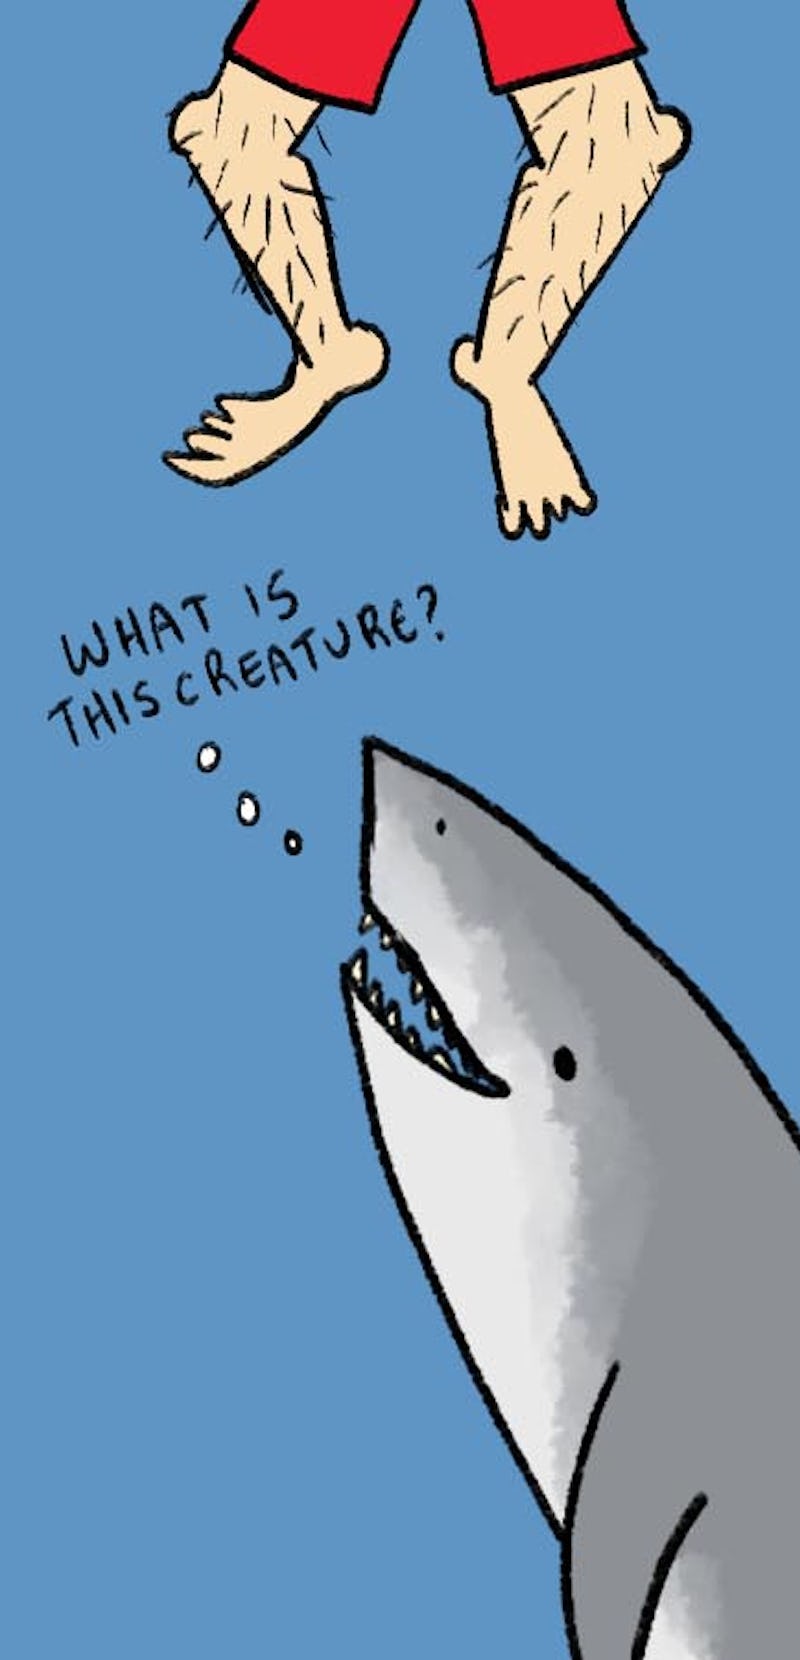 An illustration of a shark looking at human feet and the text 'What is this creature?'